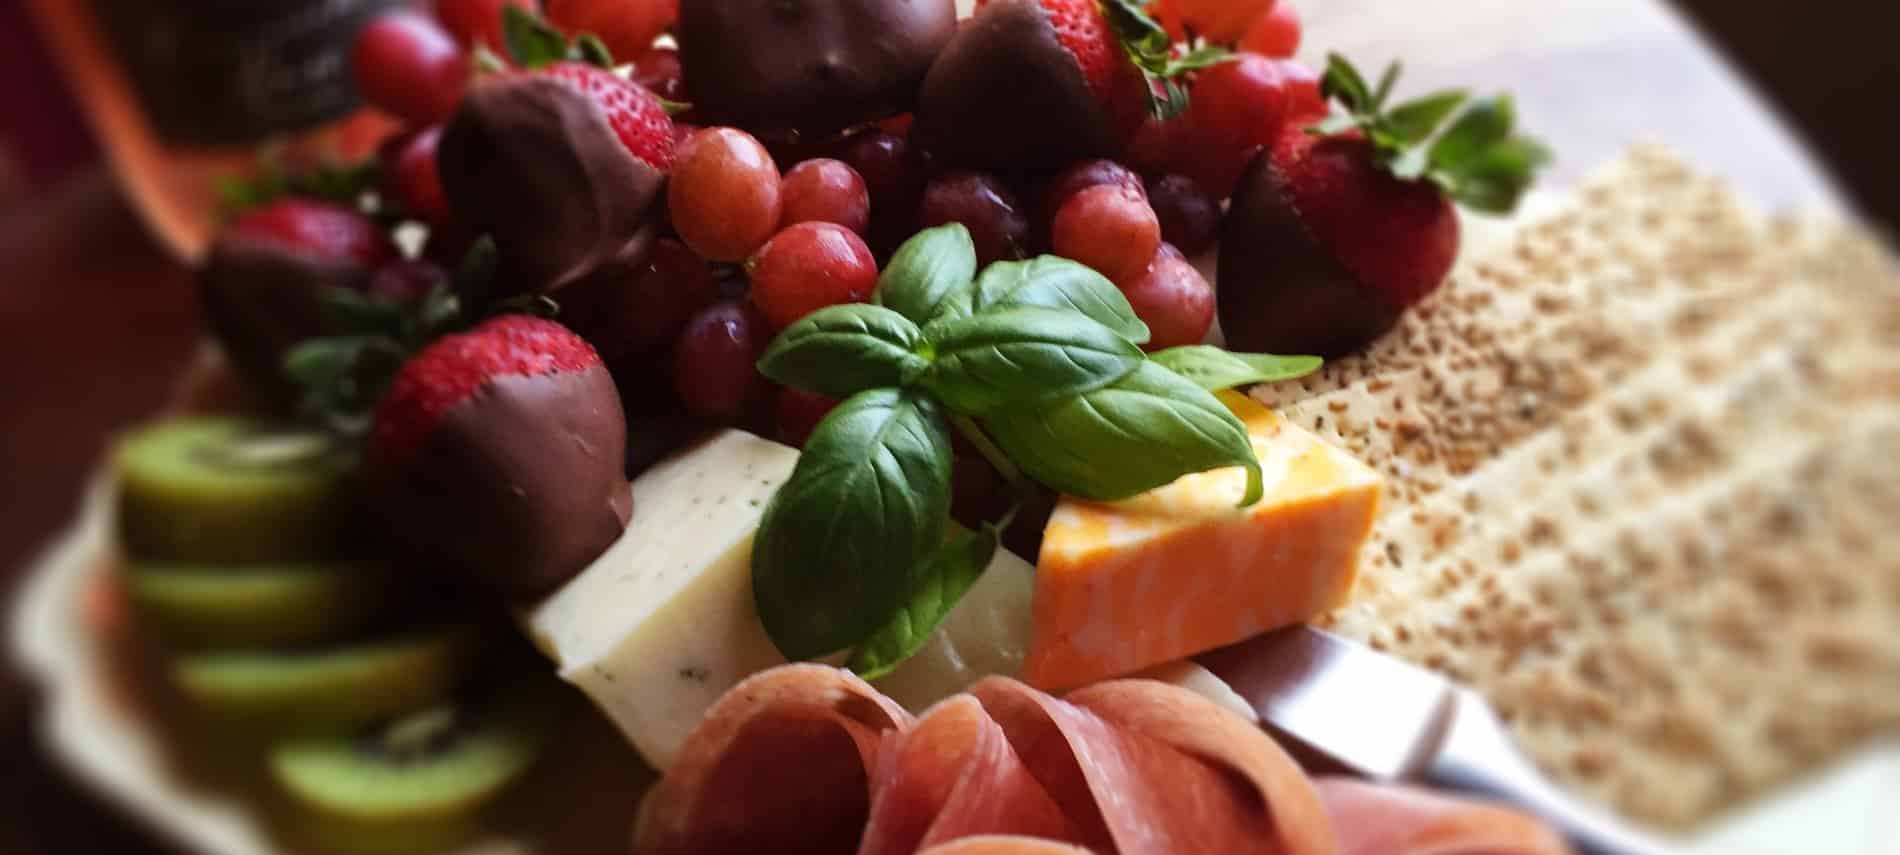 White tray piled with chocolate covered strawberries, white and orange cheeses, salami, crackers, and kiwi